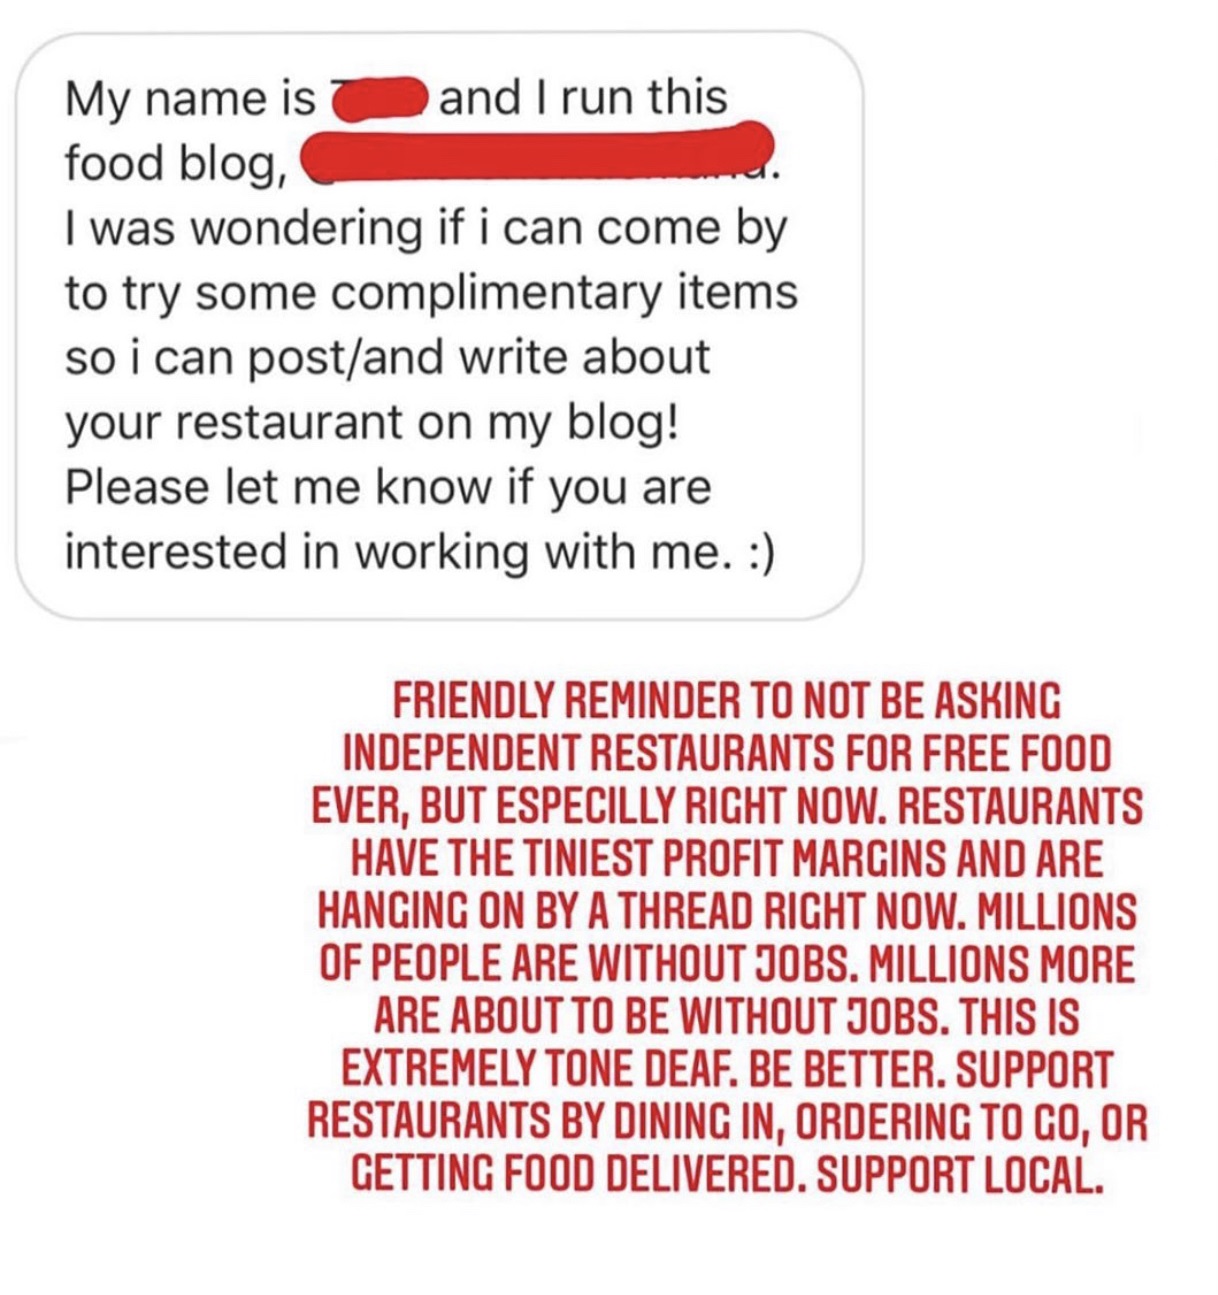 document - My name is and I run this food blog, I was wondering if i can come by to try some complimentary items so i can postand write about your restaurant on my blog! Please let me know if you are interested in working with me. Friendly Reminder To Not